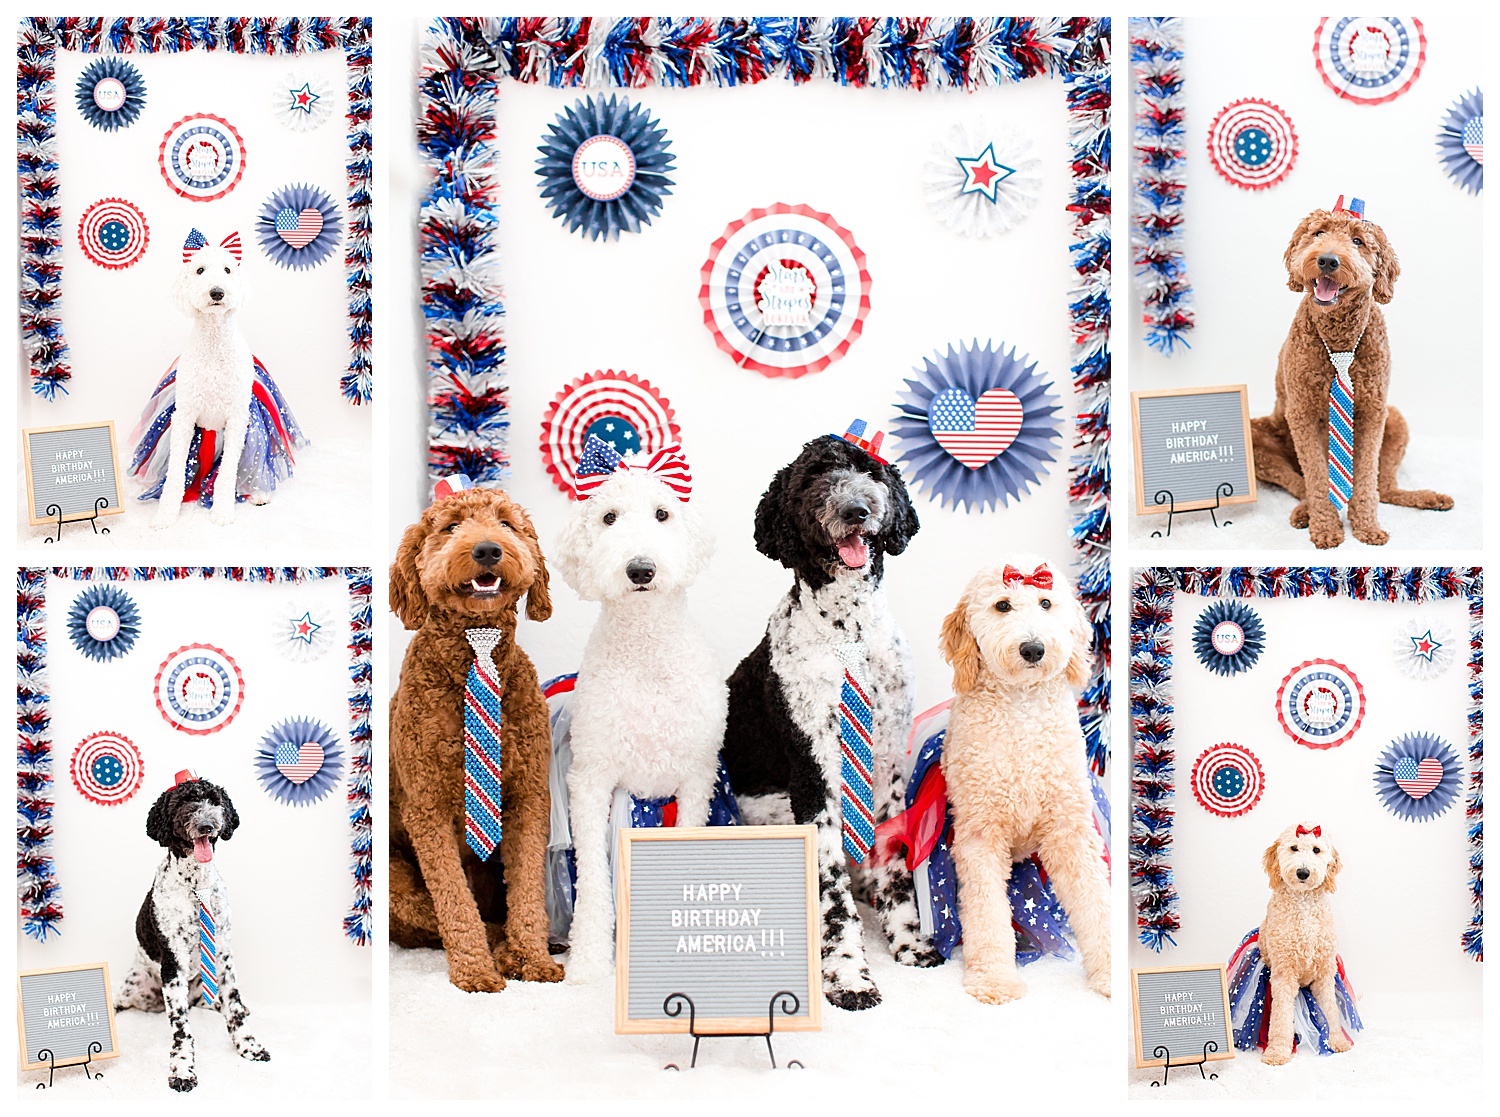 Phoenix wedding photographer, red, white and blue, USA,Dogs celebrating American independence day, fourth of July goldendoodle pictures, kids with dogs, kids. with goldendoodles, red goldendoodle, black goldendoodle, black and white goldendoodle, white goldendoodle, gold goldendoodle, poodle mix